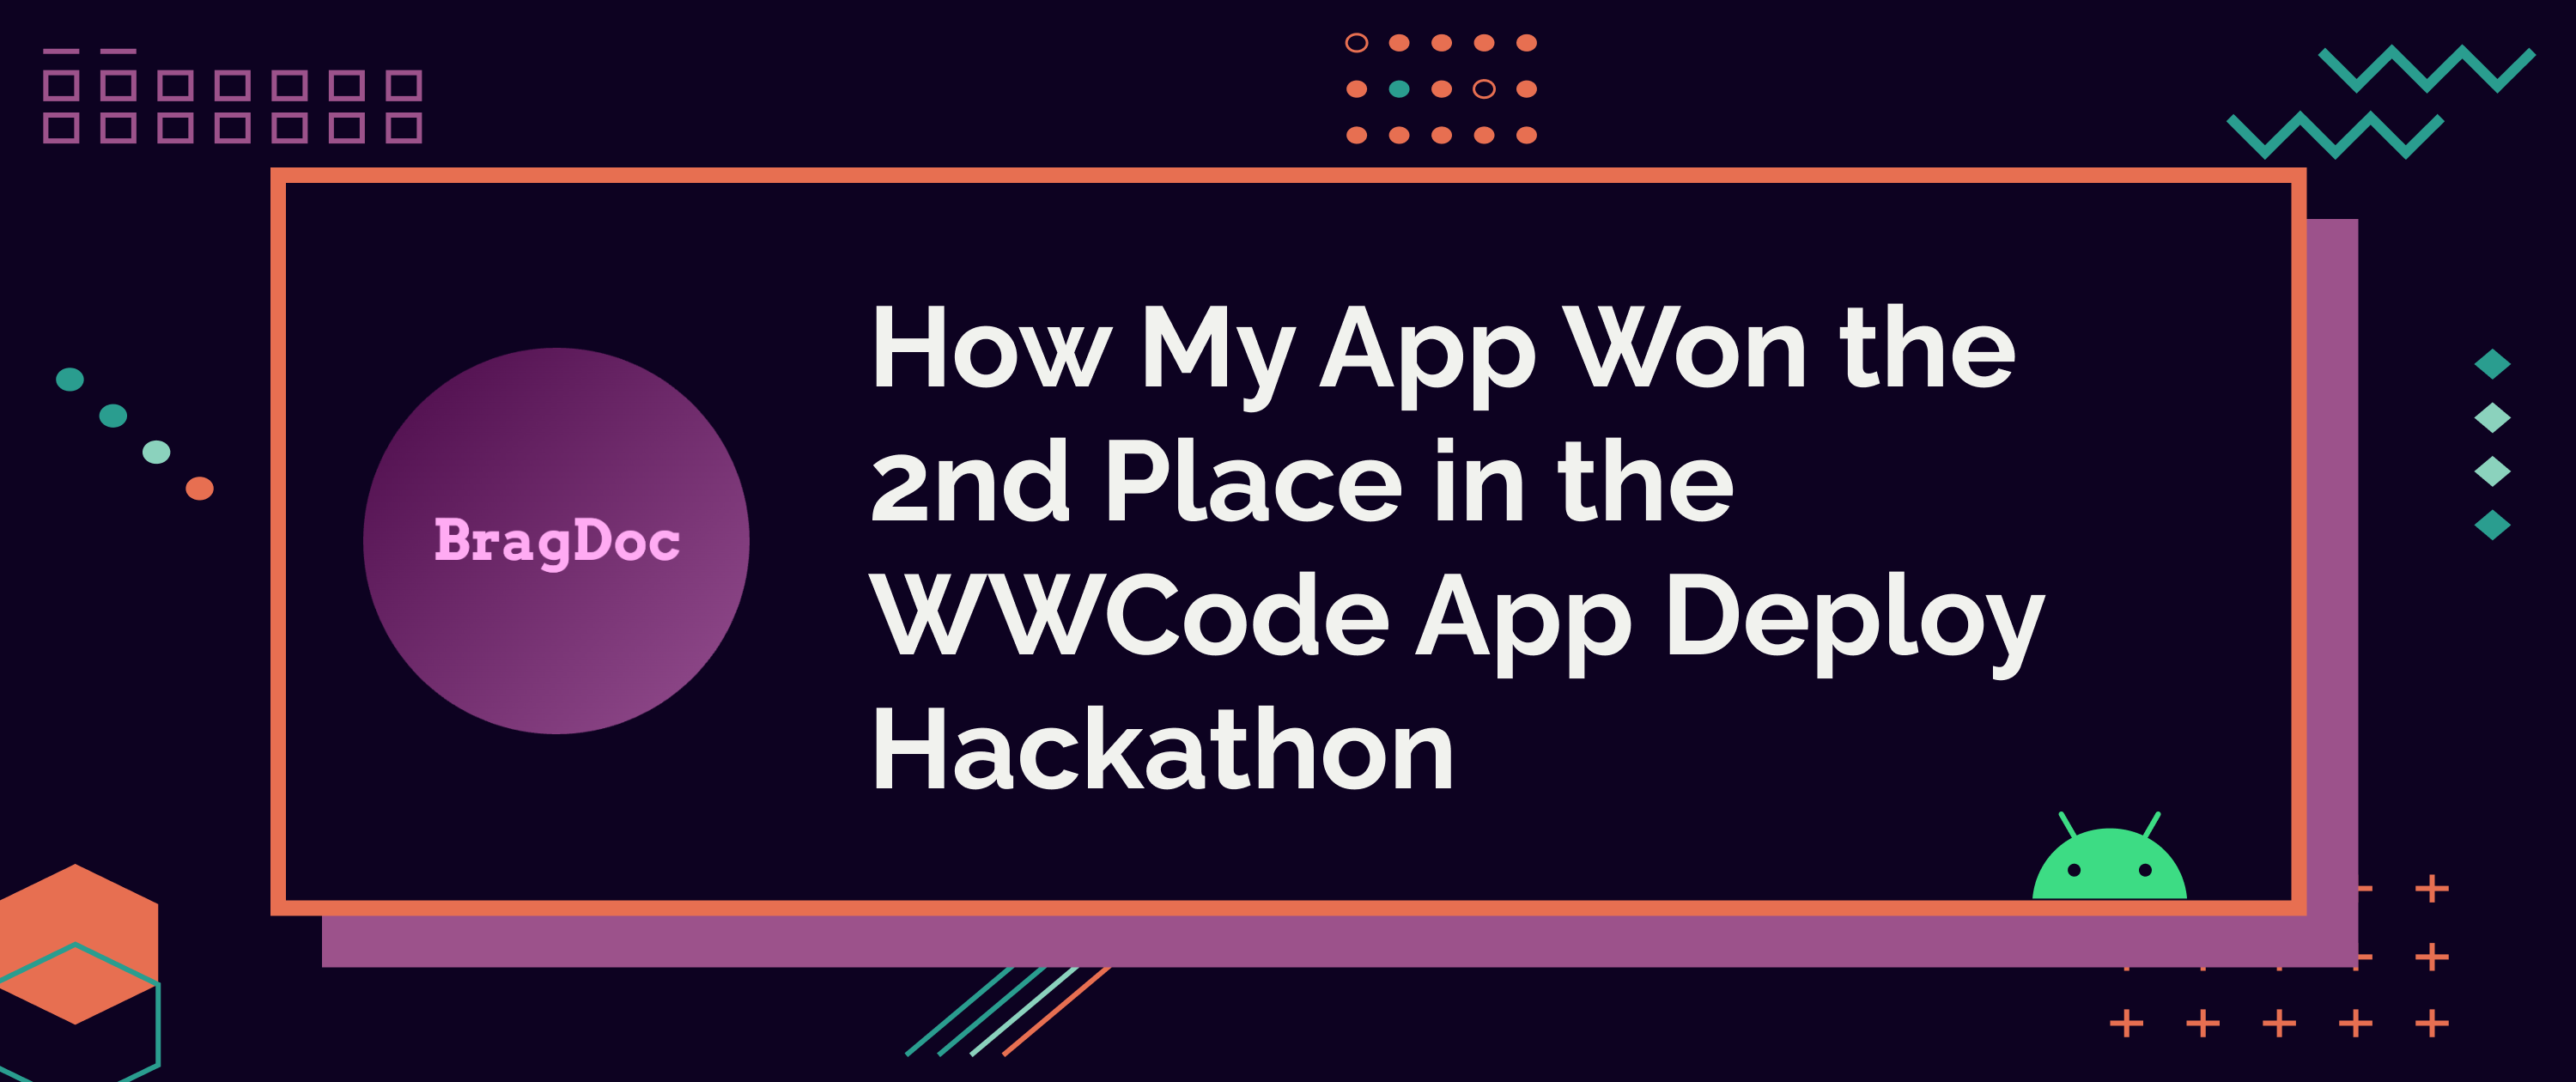 How My App Won the 2nd Place in the WWCode App Deploy Hackathon
